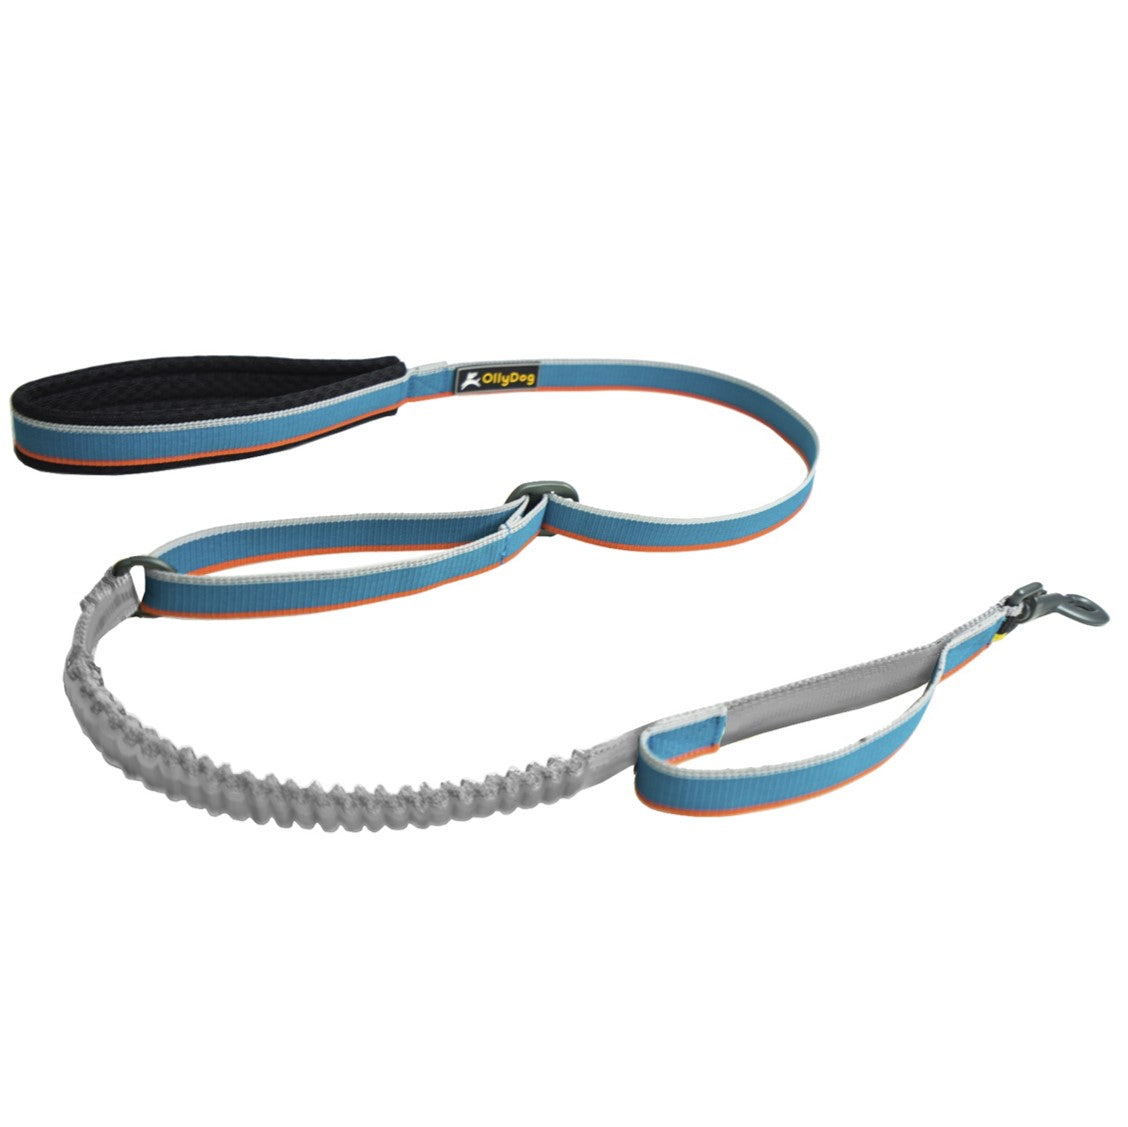 Urban Journey Reflective Spring Leash- Save 20% at Checkout